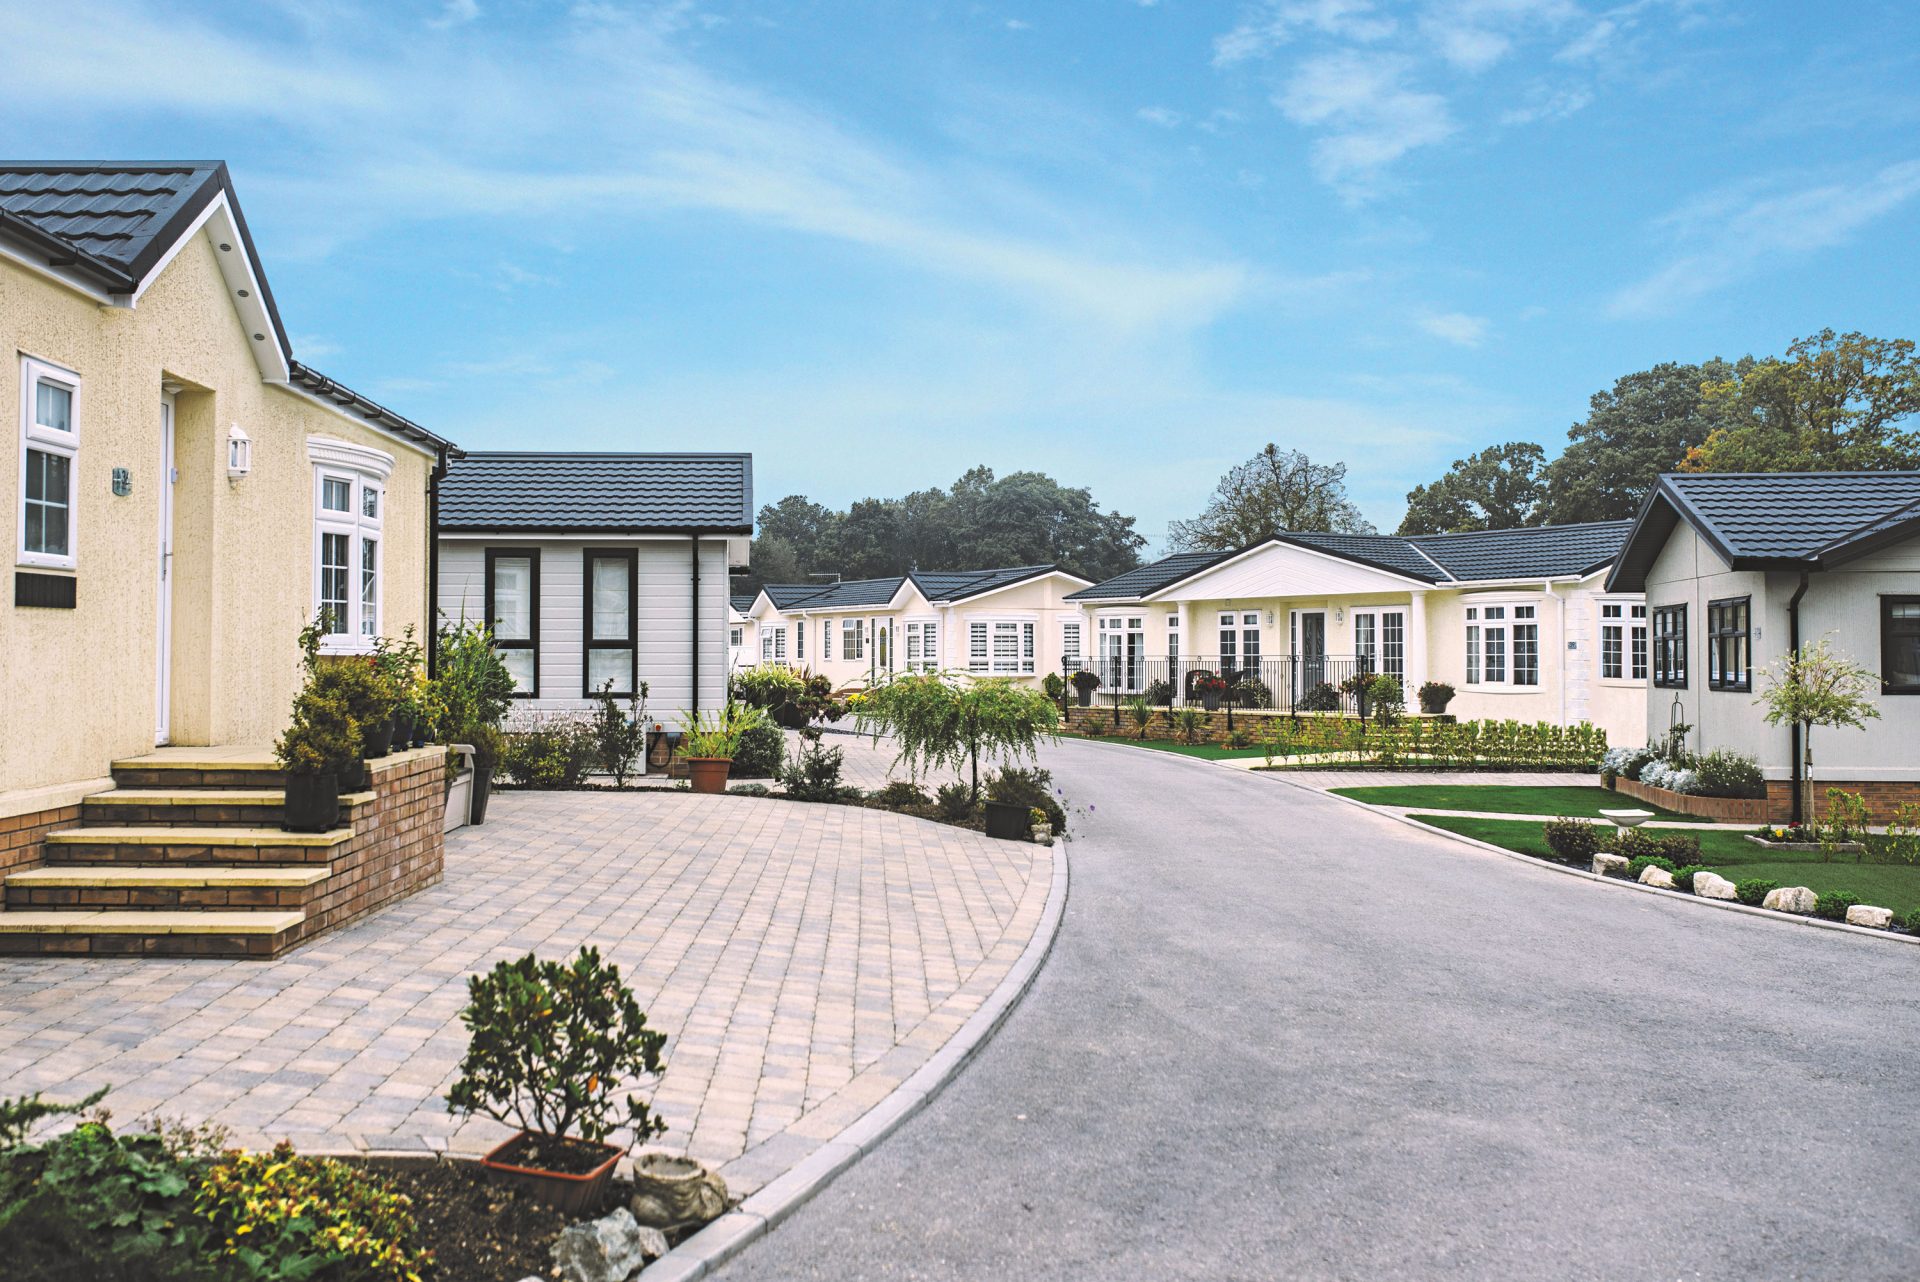 bungalows for sale in hampshire